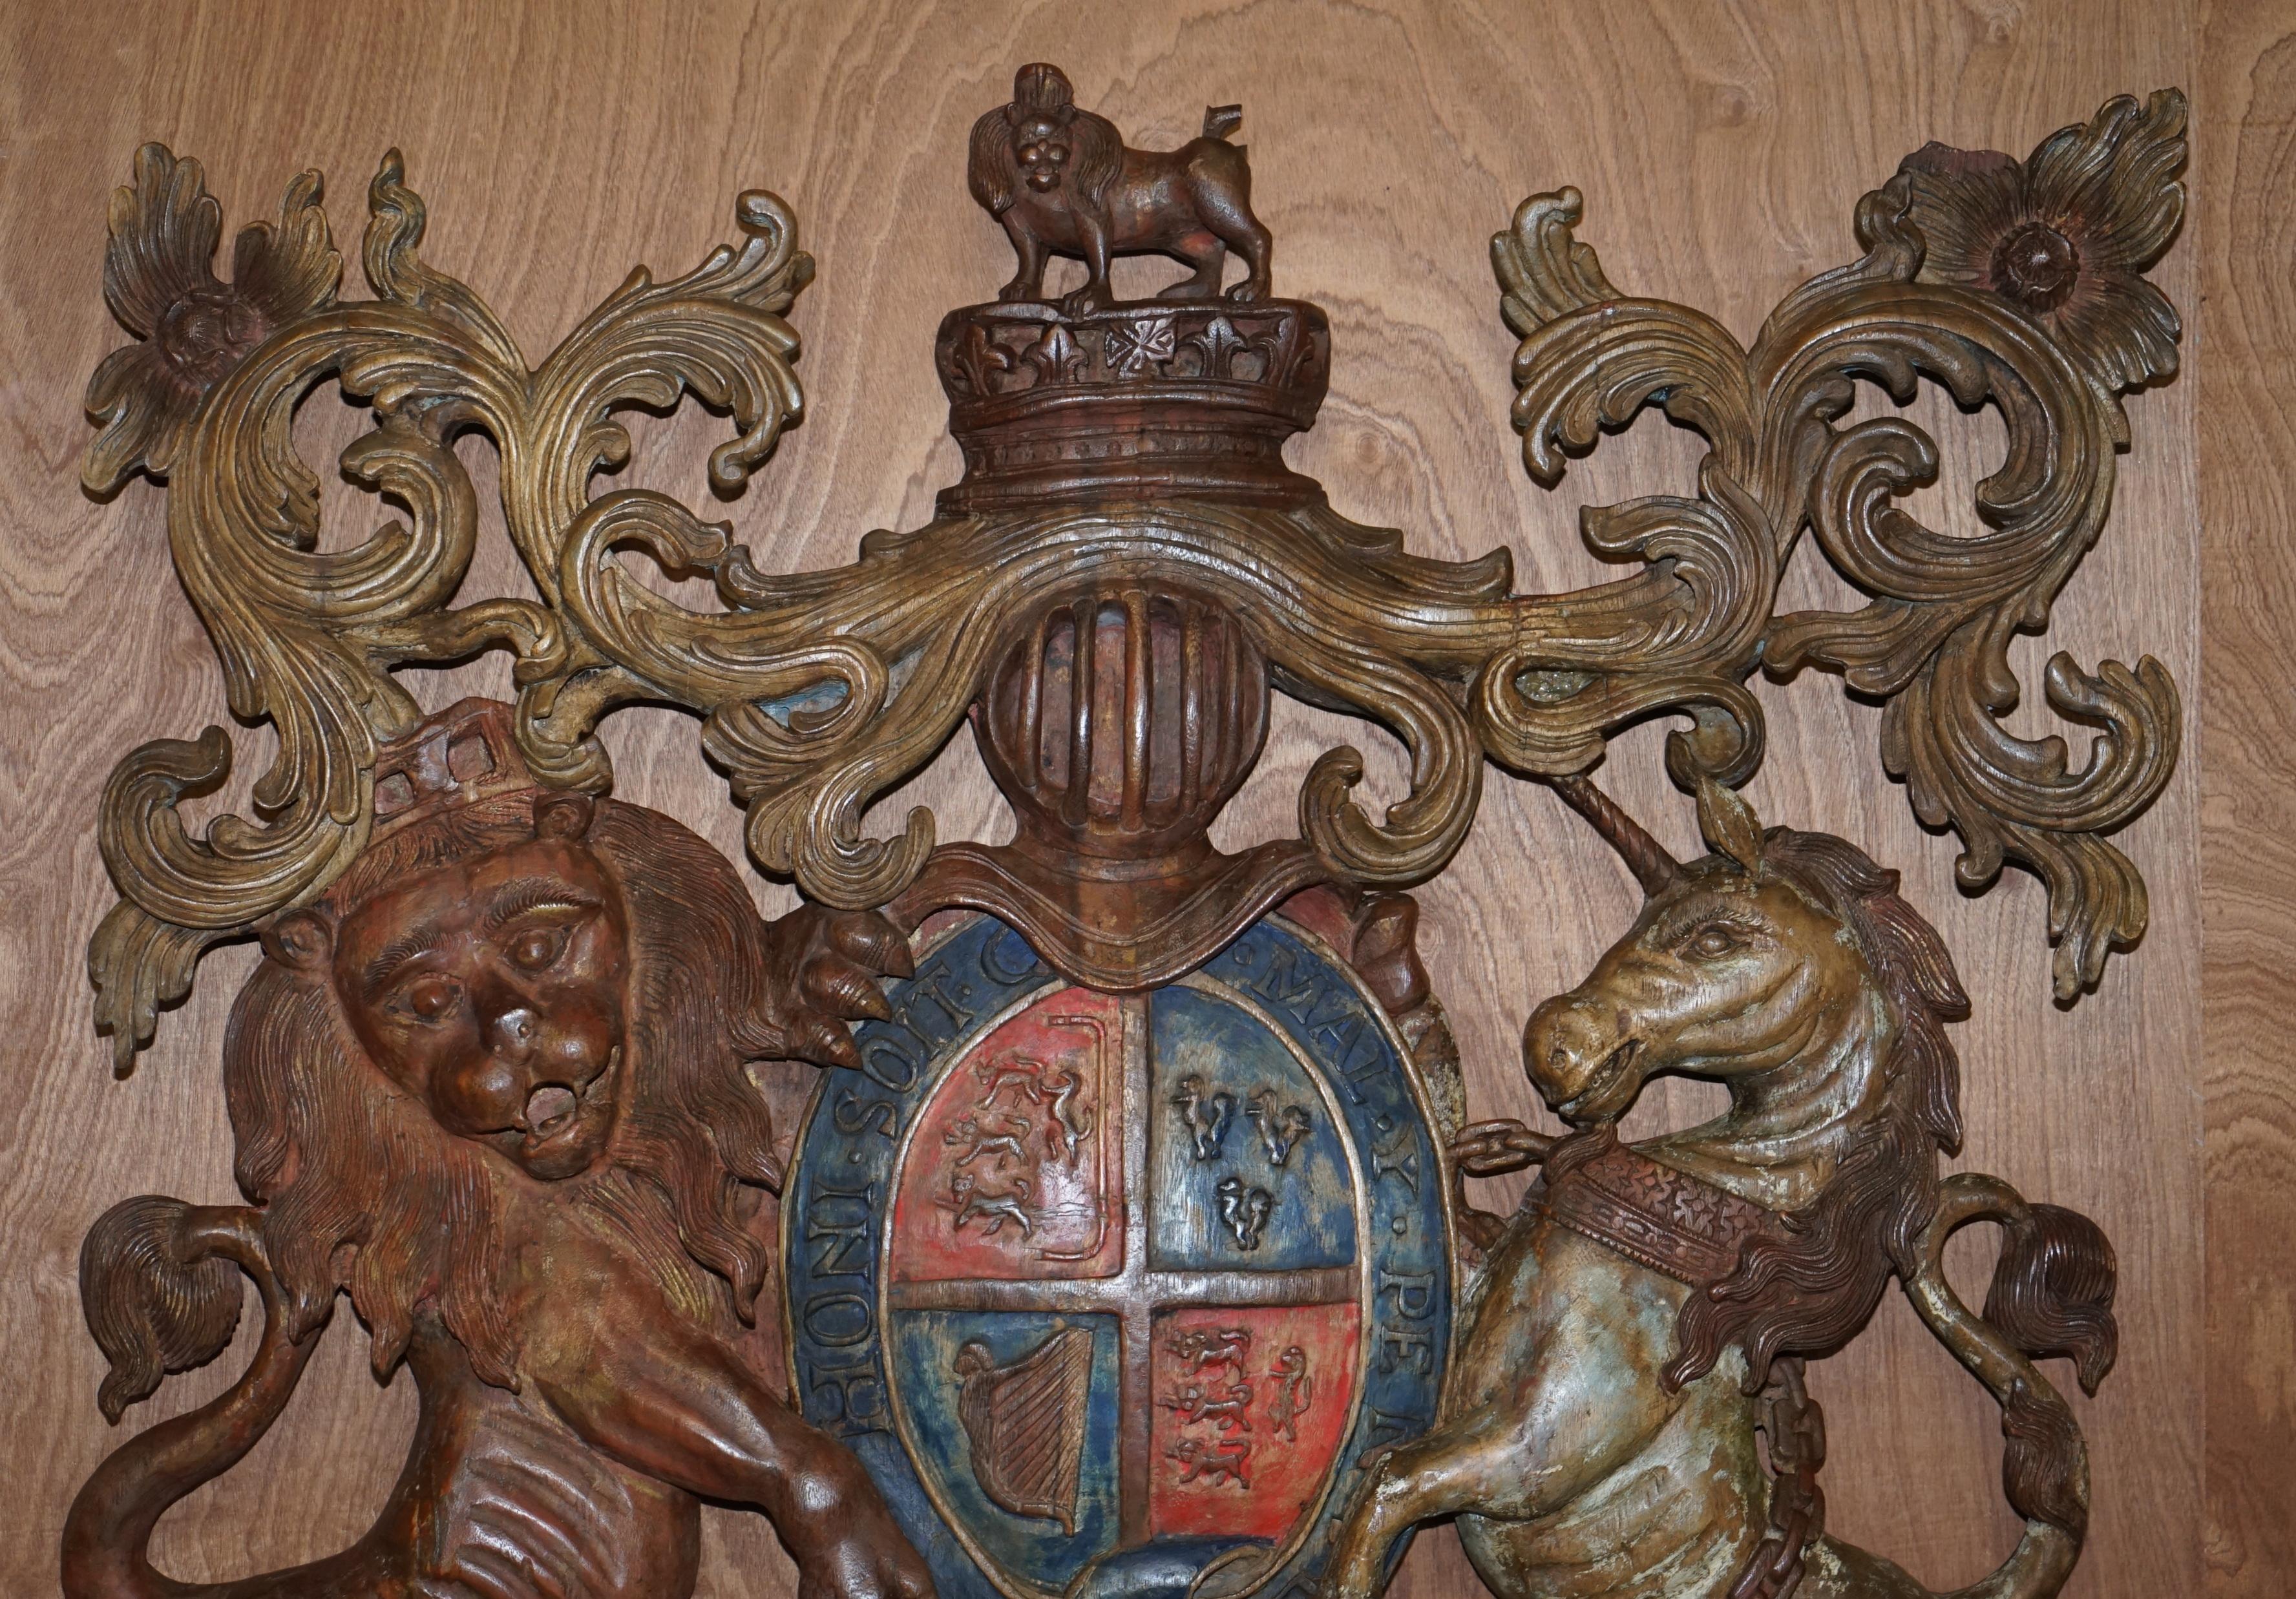 We are delighted to offer for sale this very rare, large for its type, Royal coat of arms / Armorial Crest circa 1707-1714 with original Polychrome paint

This is an exceptionally well made and decorative piece, it is large as mentioned, the full